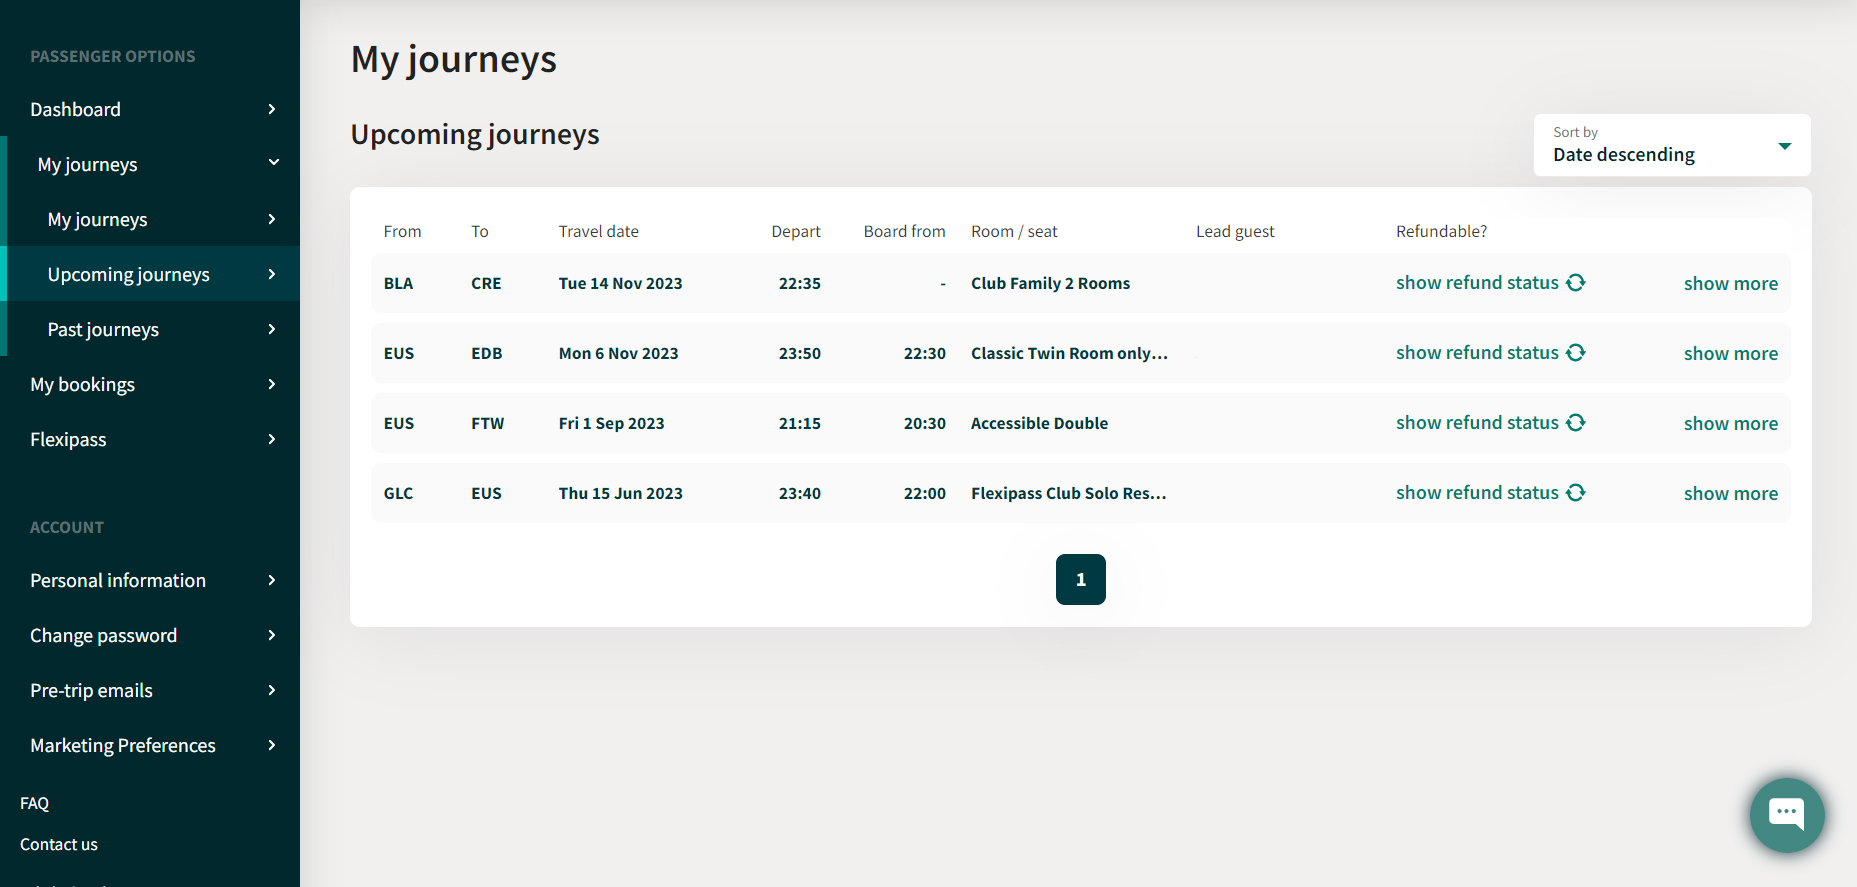 Upcoming journeys overview